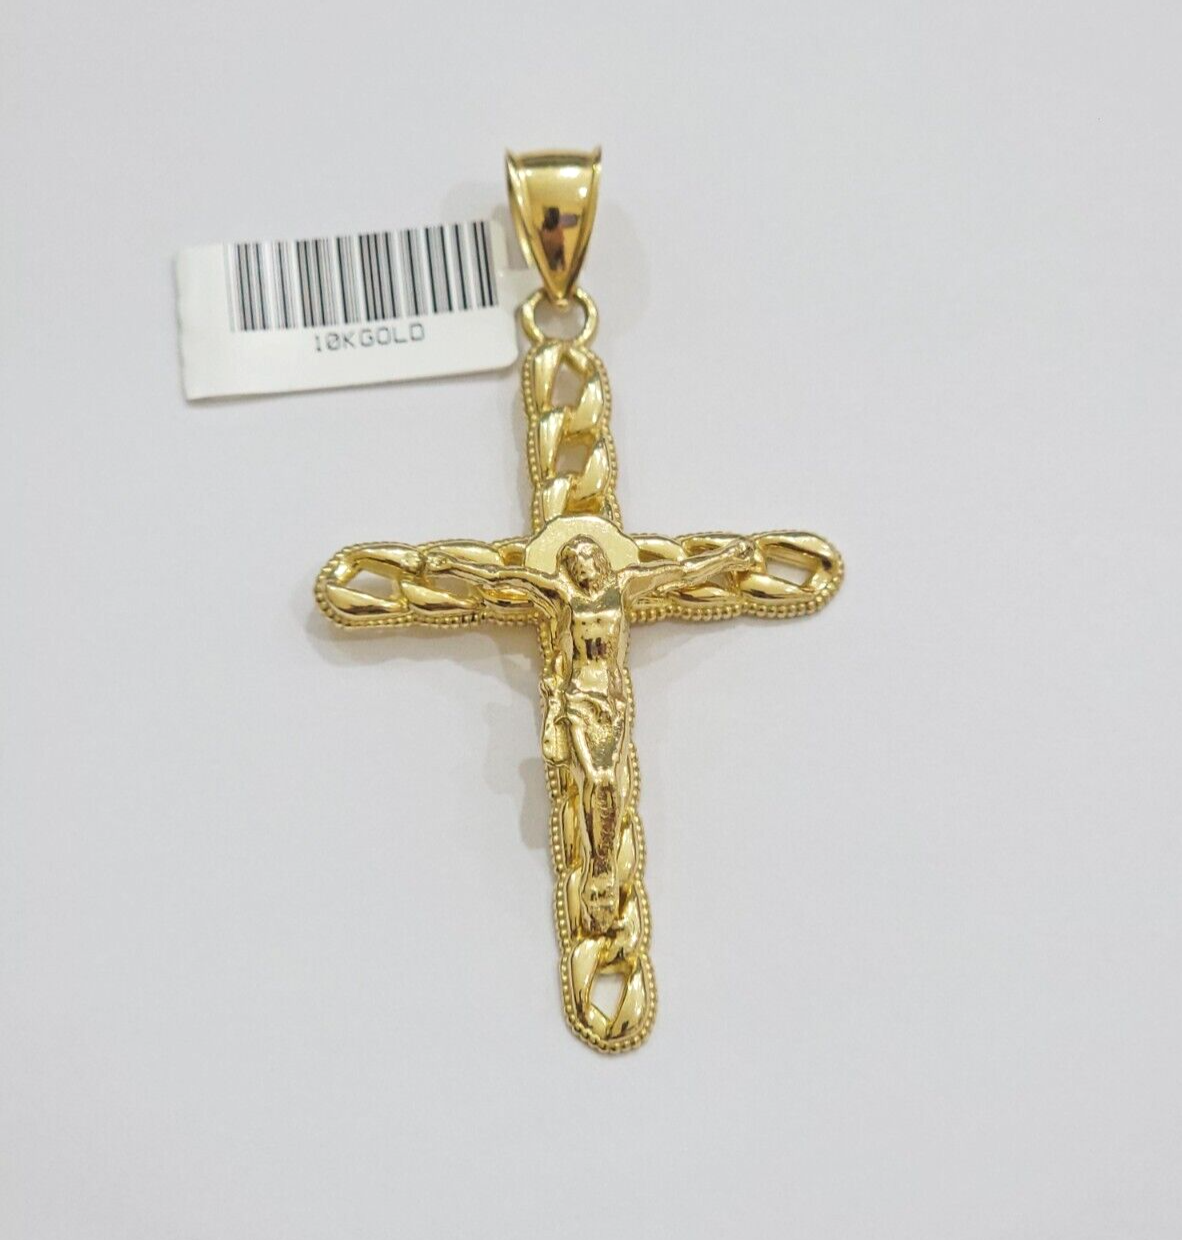 10K Yellow Gold Cross Pendant Mens Jesus Crucifix Charm 2.5 Inch For Thick Chain